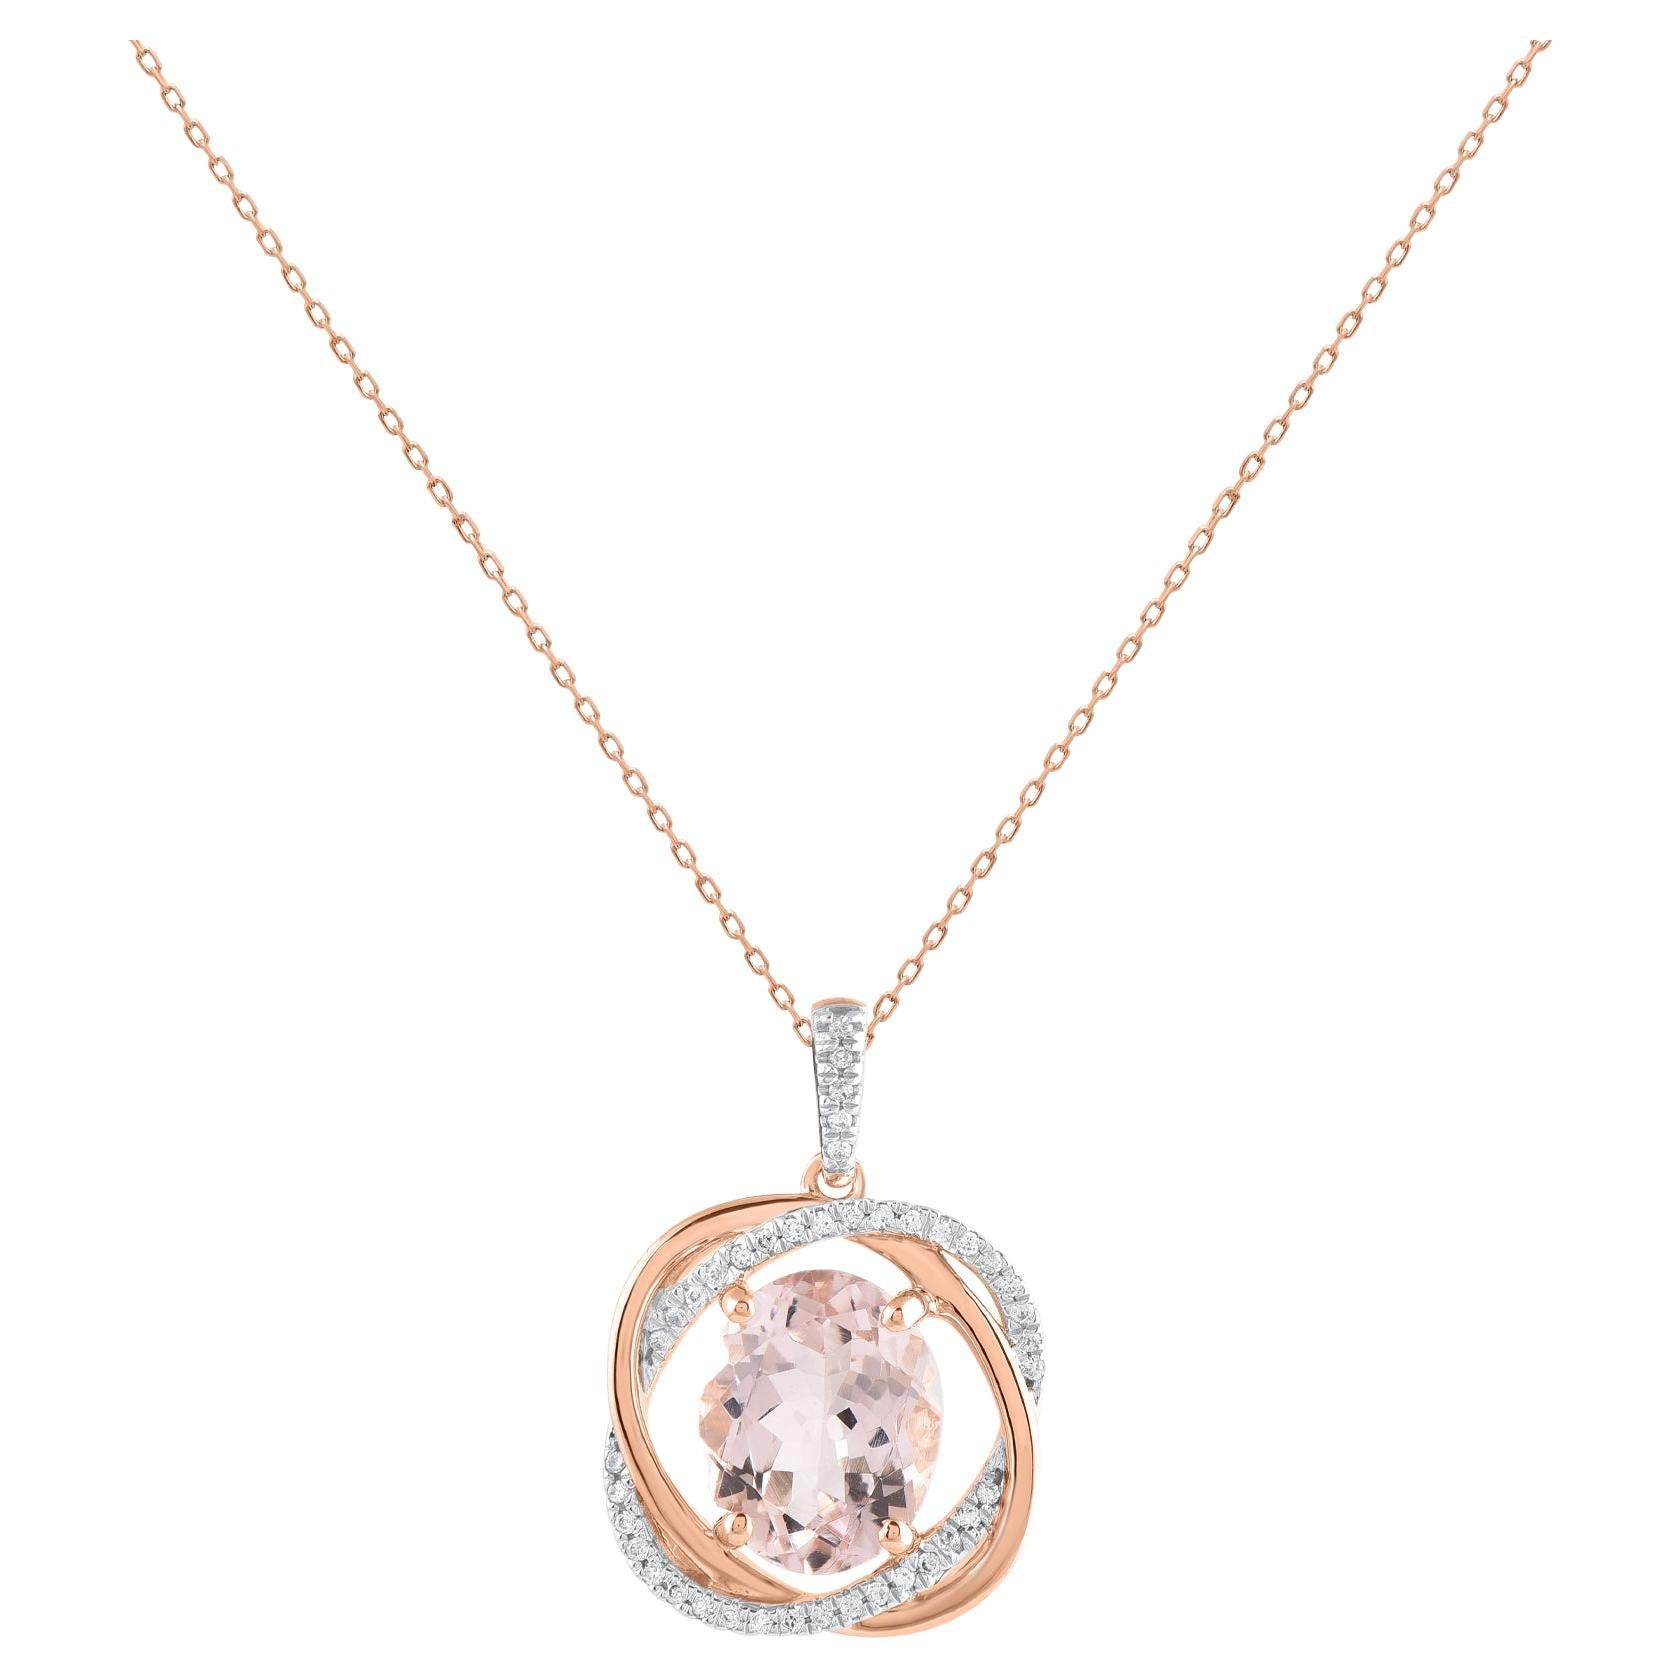 TJD 0.12 Ct Diamond and 2 Ct Oval Morganite Pendant Necklace in 14KT Rose Gold